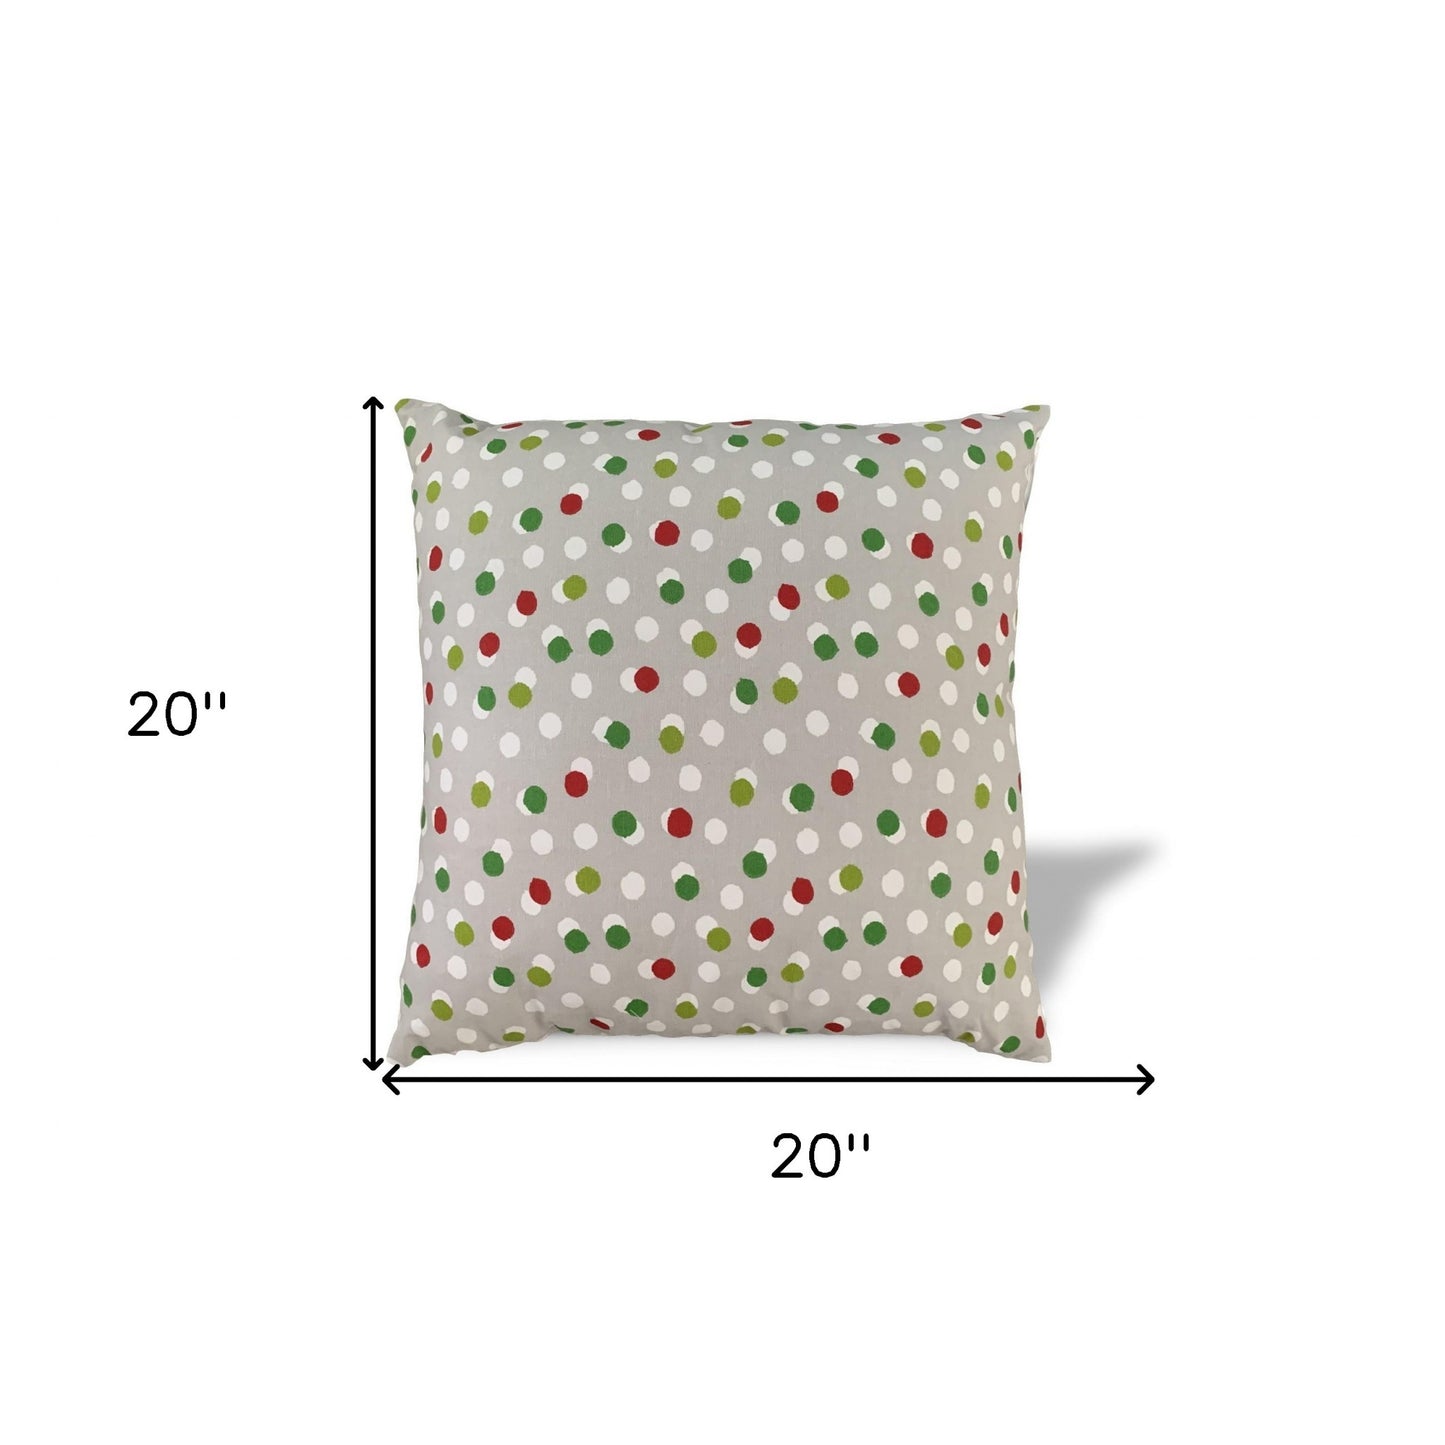 20" X 20" Red Gray And White Zippered 100% Cotton Polka Dots Throw Pillow Cover